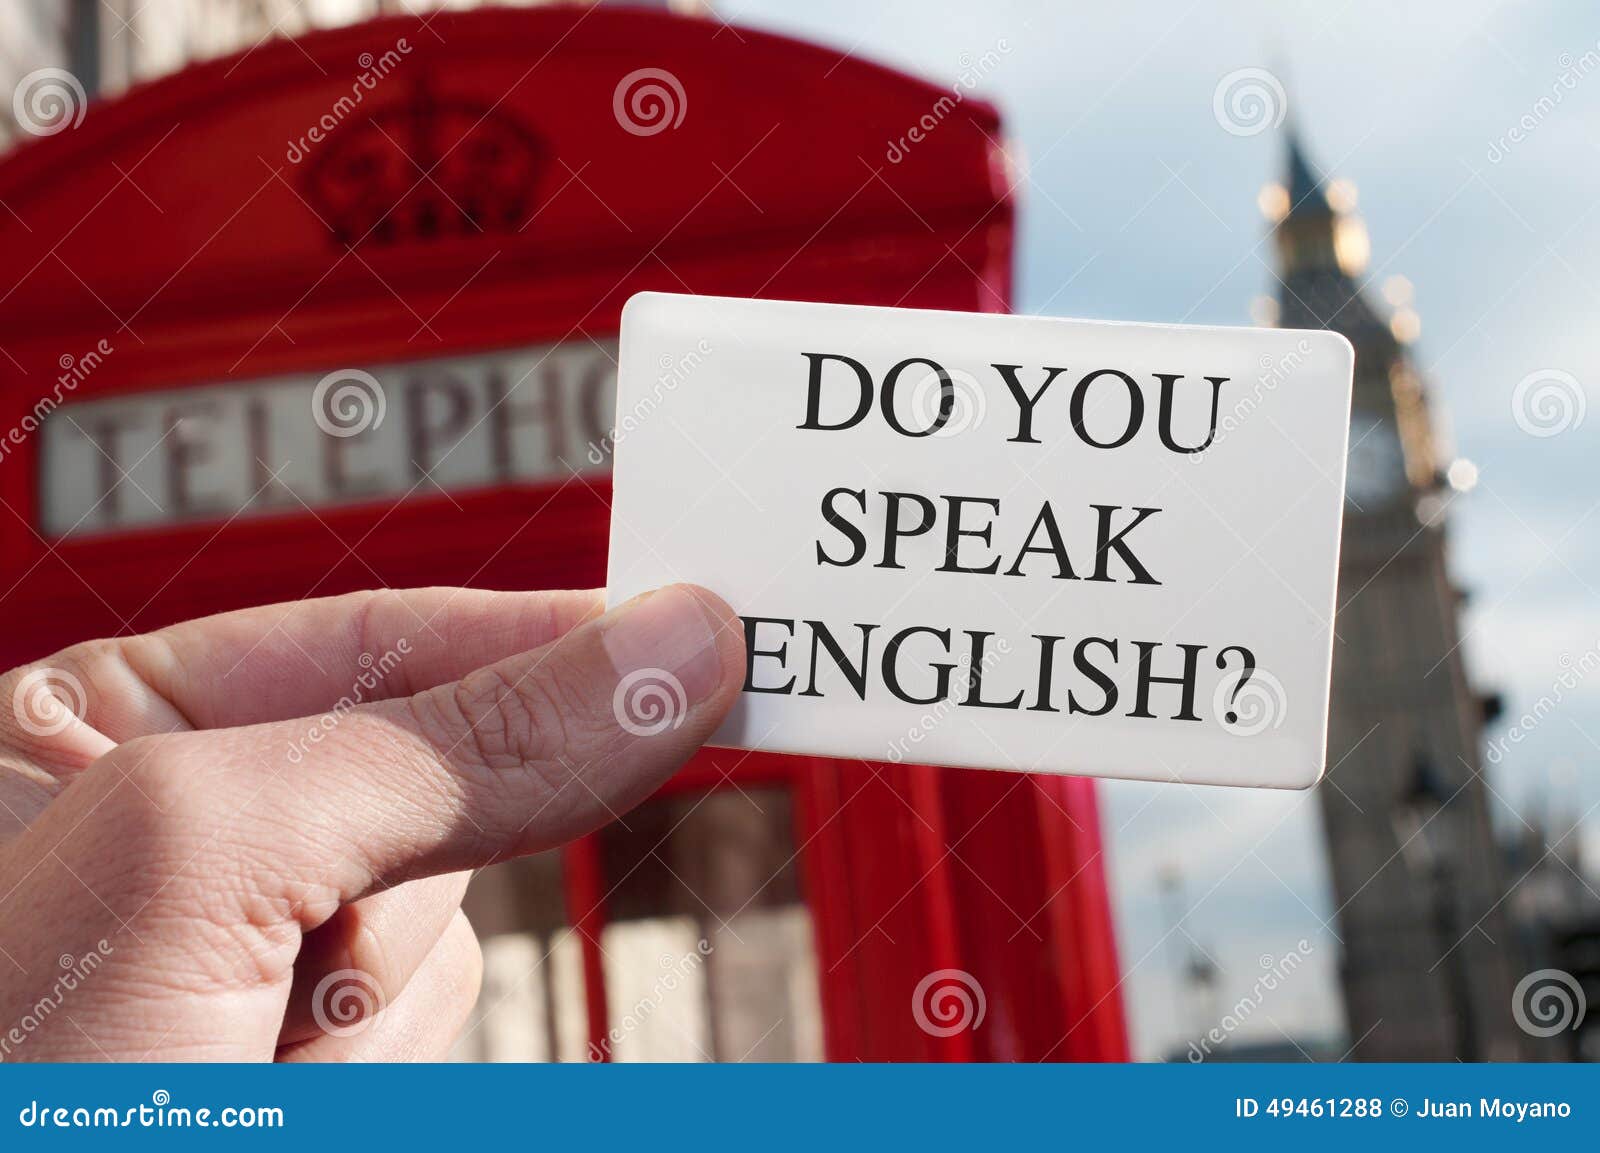 do you speak english? in a signboard with the big ben in the background